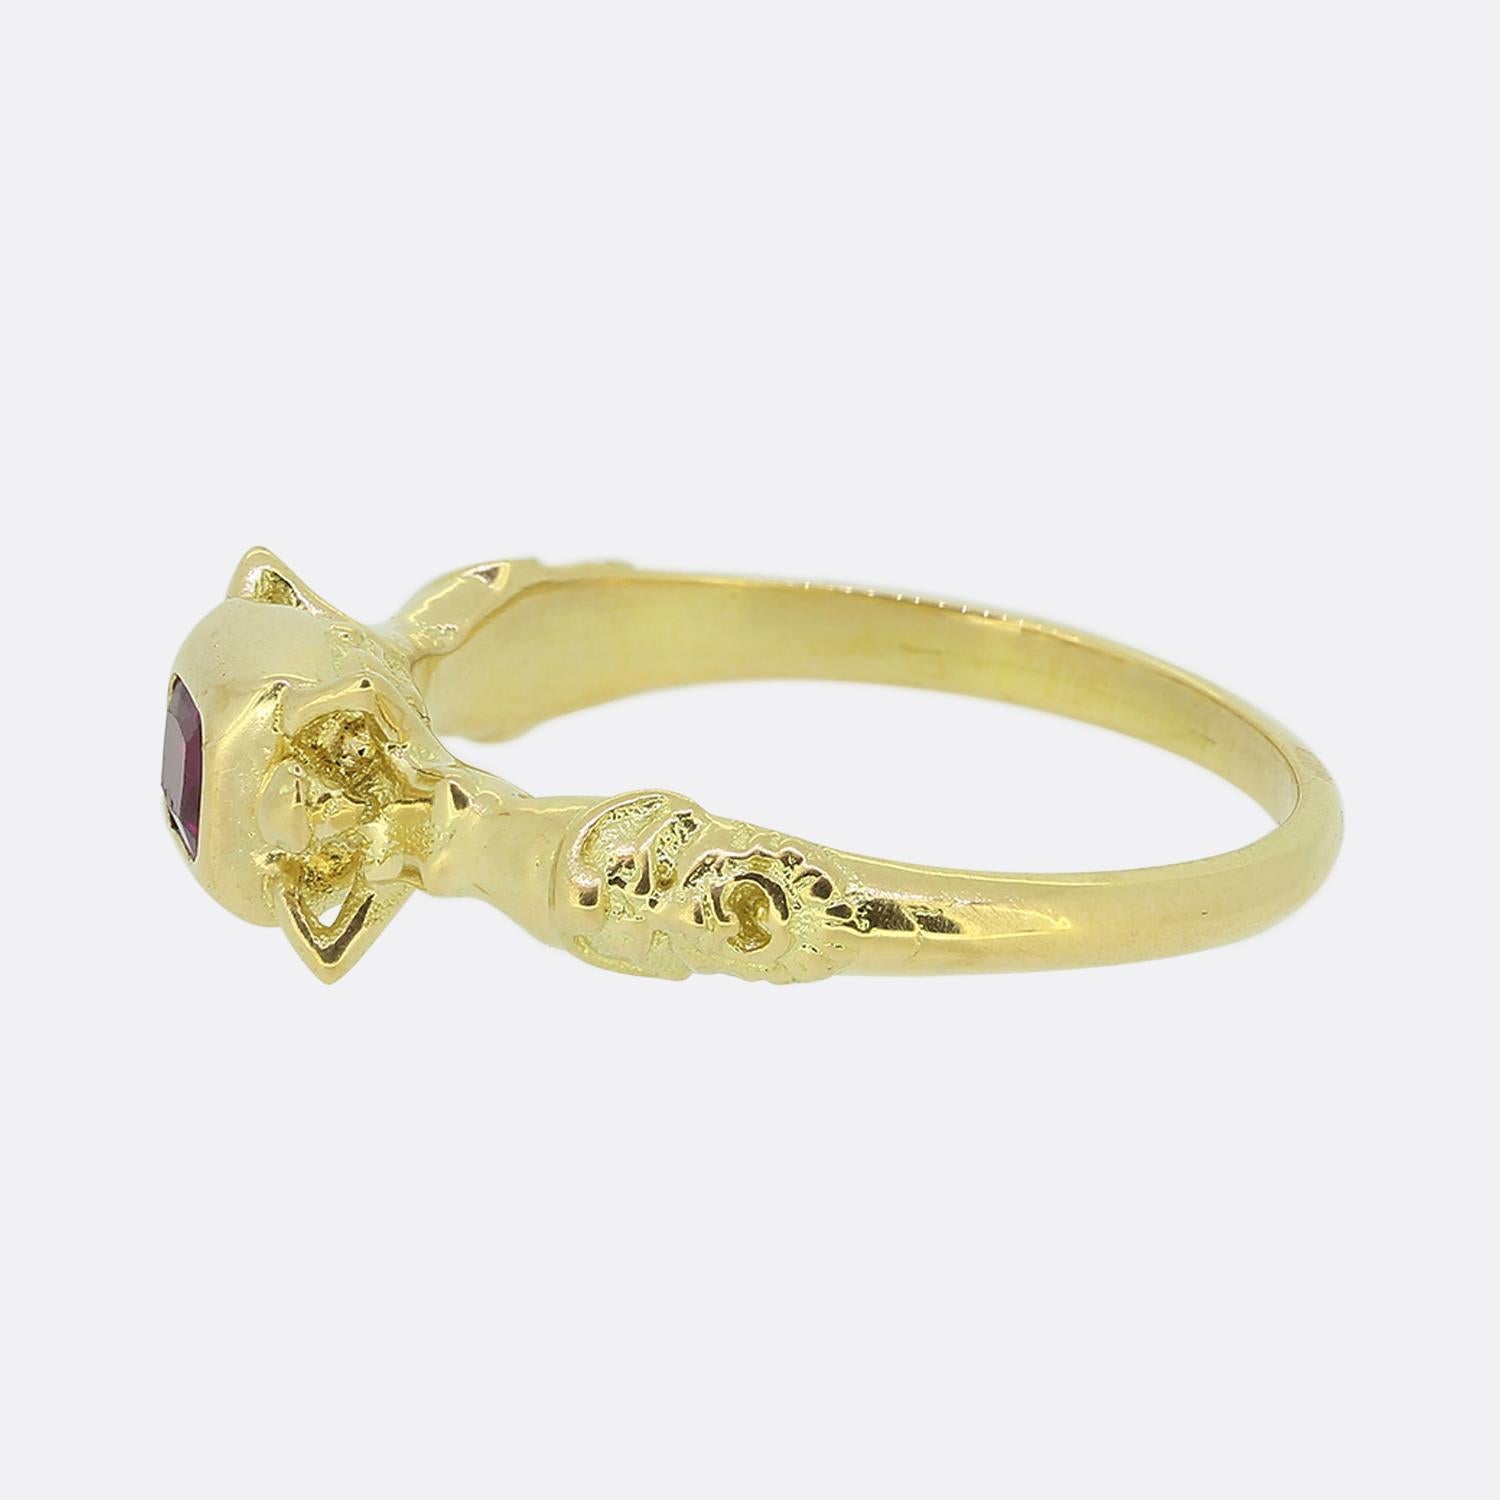 Here we have a marvellous single stone ruby ring excellently paying homage a style pioneered during the Renaissance period. This piece has been crafted from 18ct yellow gold with the head being bezel set with a single elongated cushion cut ruby.